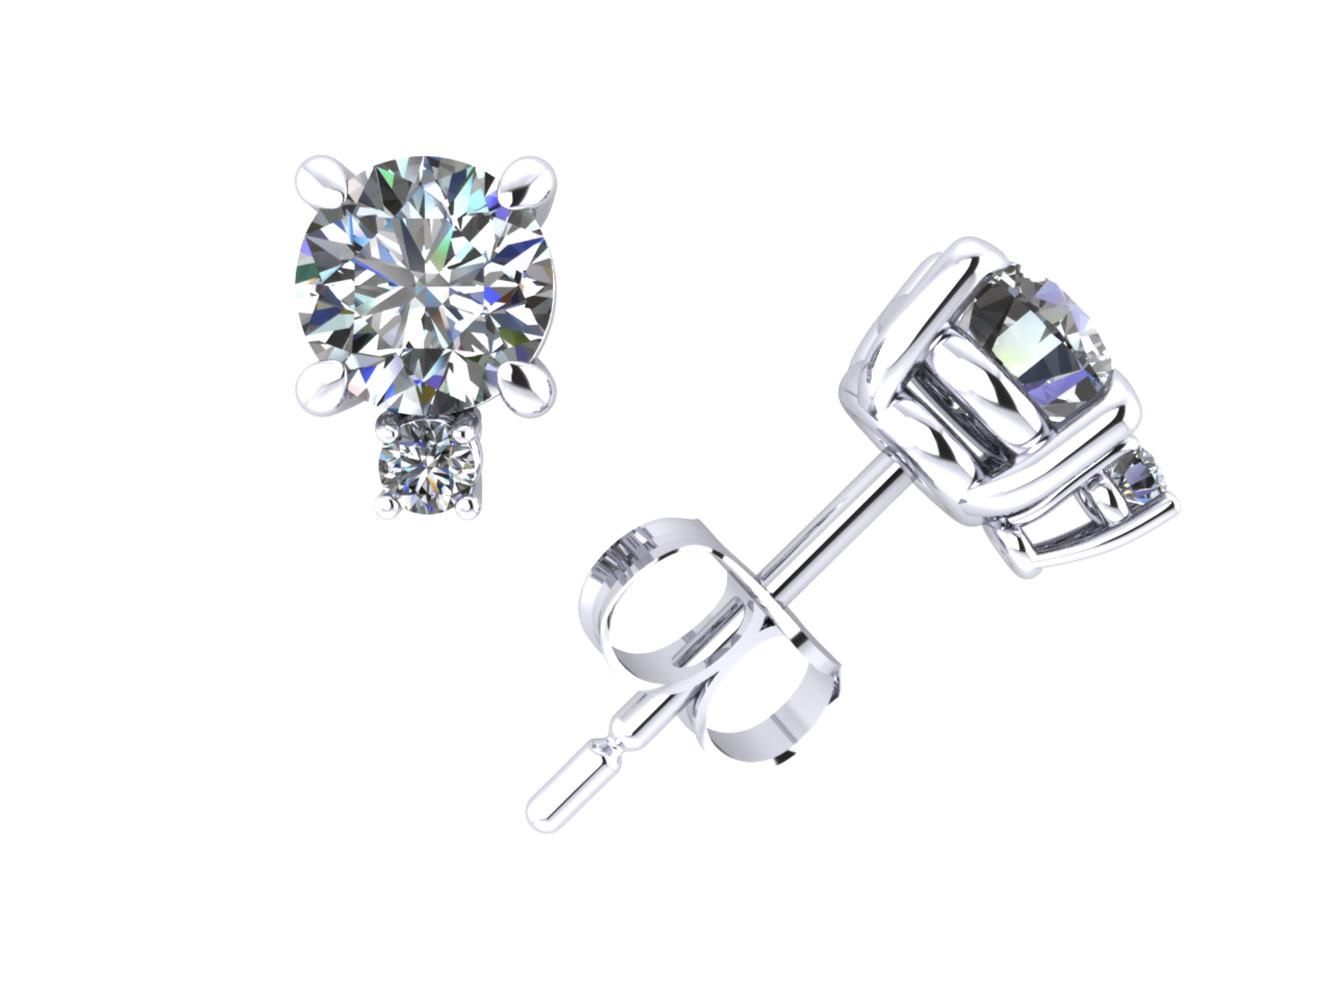 Jewel We Sell 1.50Ct Round Diamond Stud Earrings with Accents 14Karat White or Yellow Gold Prong H SI2